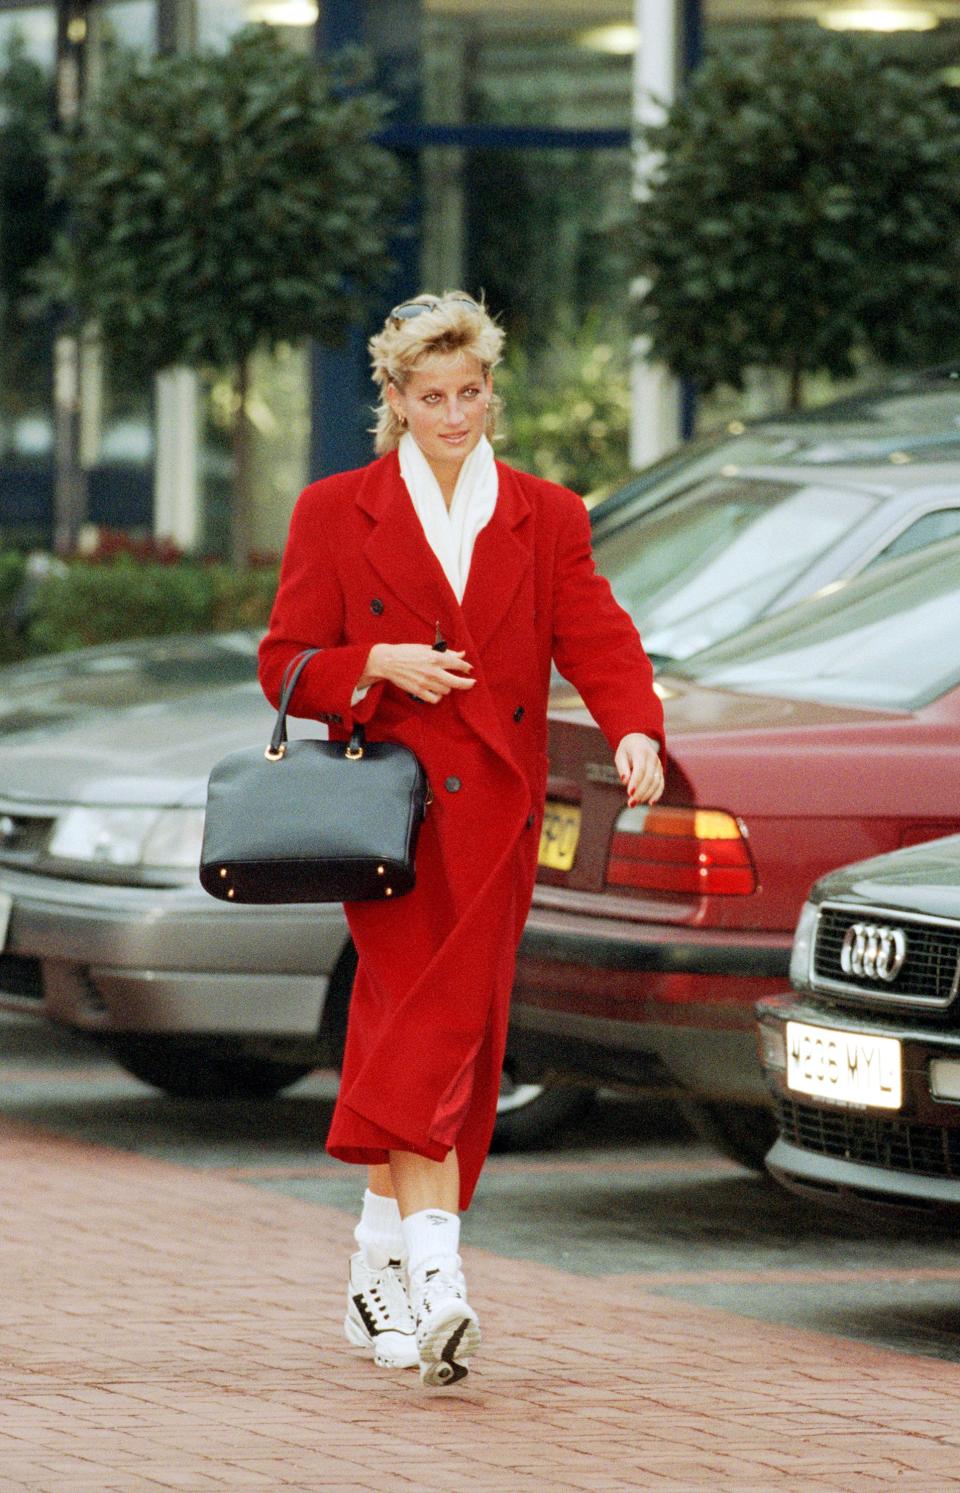 <h1 class="title">PRINCESS DIANA LEAVING THE HARBOUR CLUB GYM IN CHELSEA, LONDON, BRITAIN - 1996</h1> <cite class="credit">Photo: Shutterstock</cite>